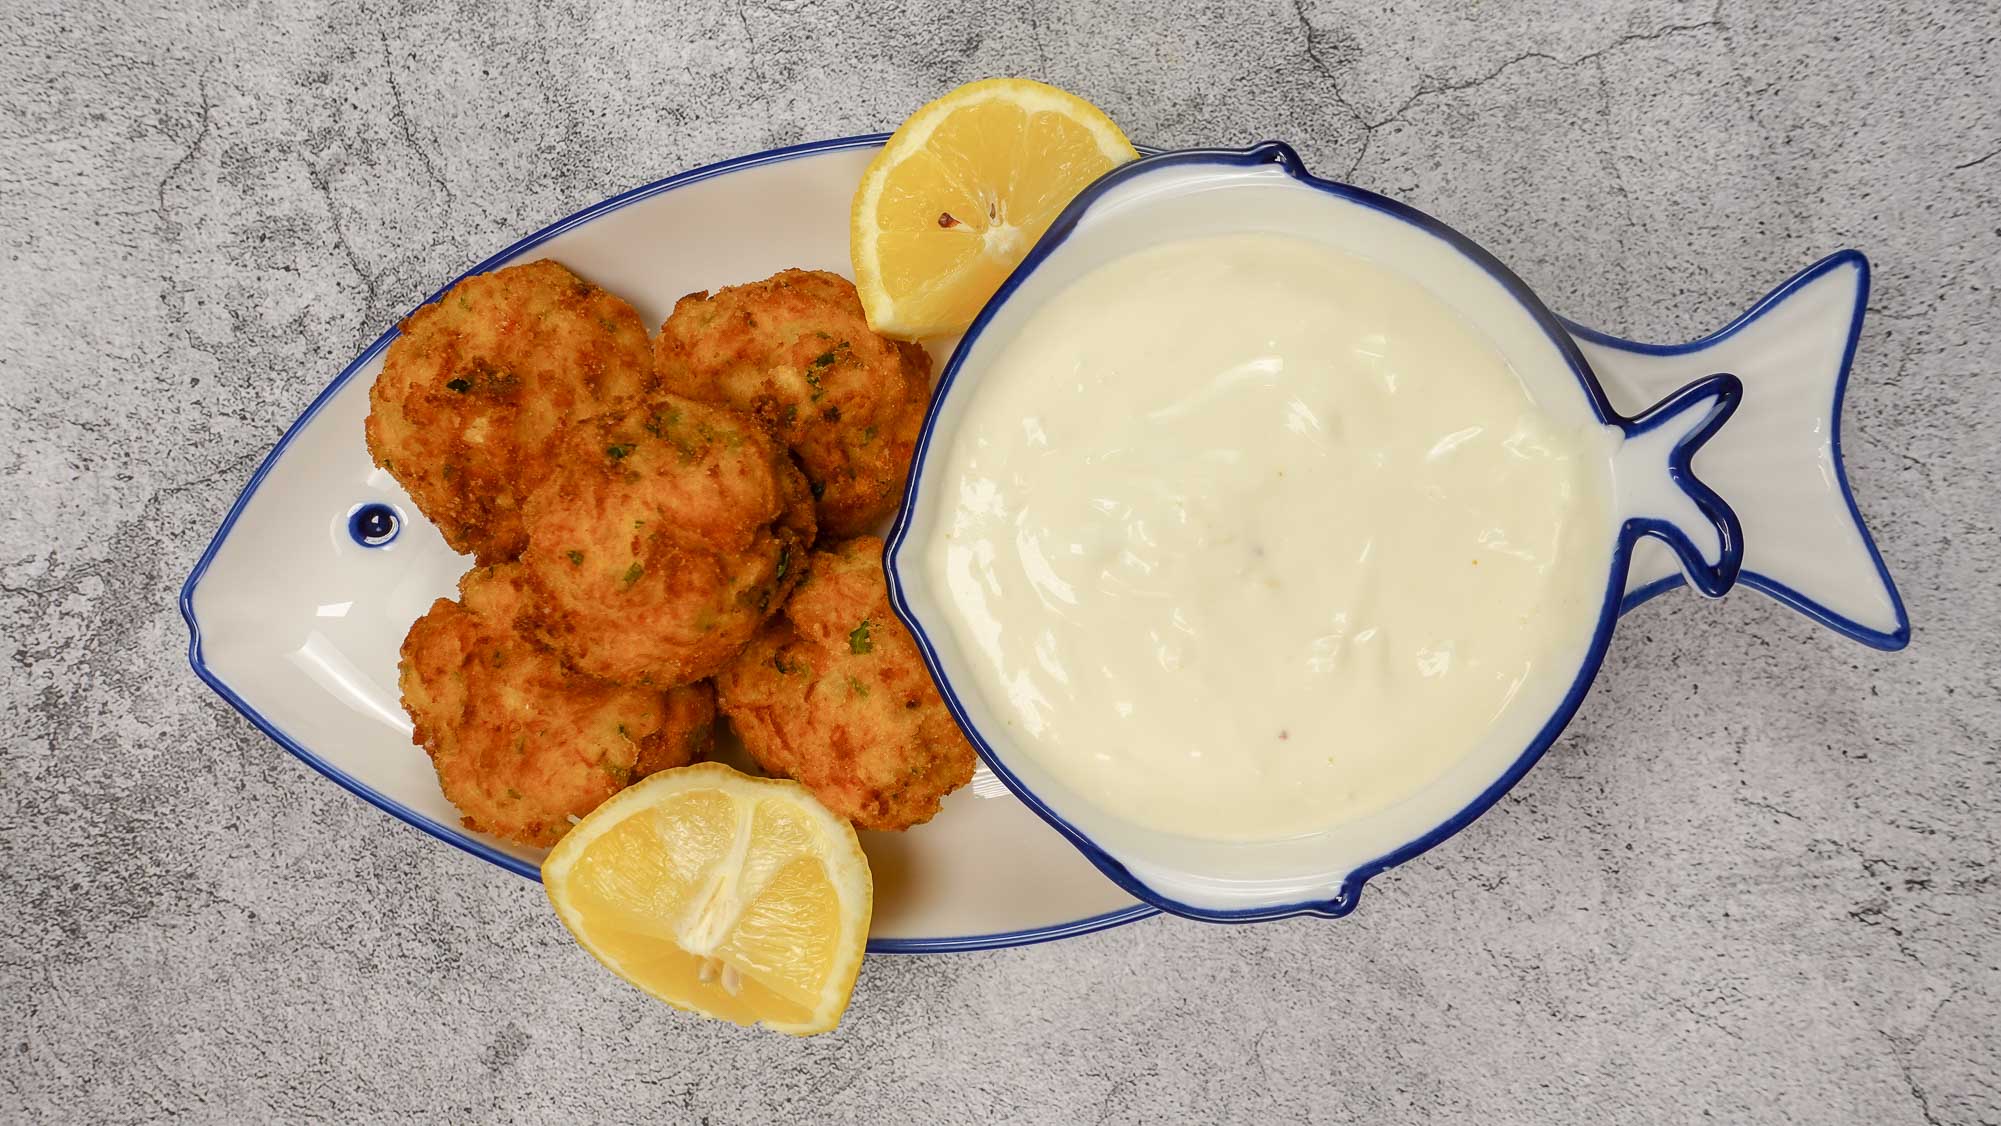 Golden shrimp croquettes served with a sauce and lemon on a dish.